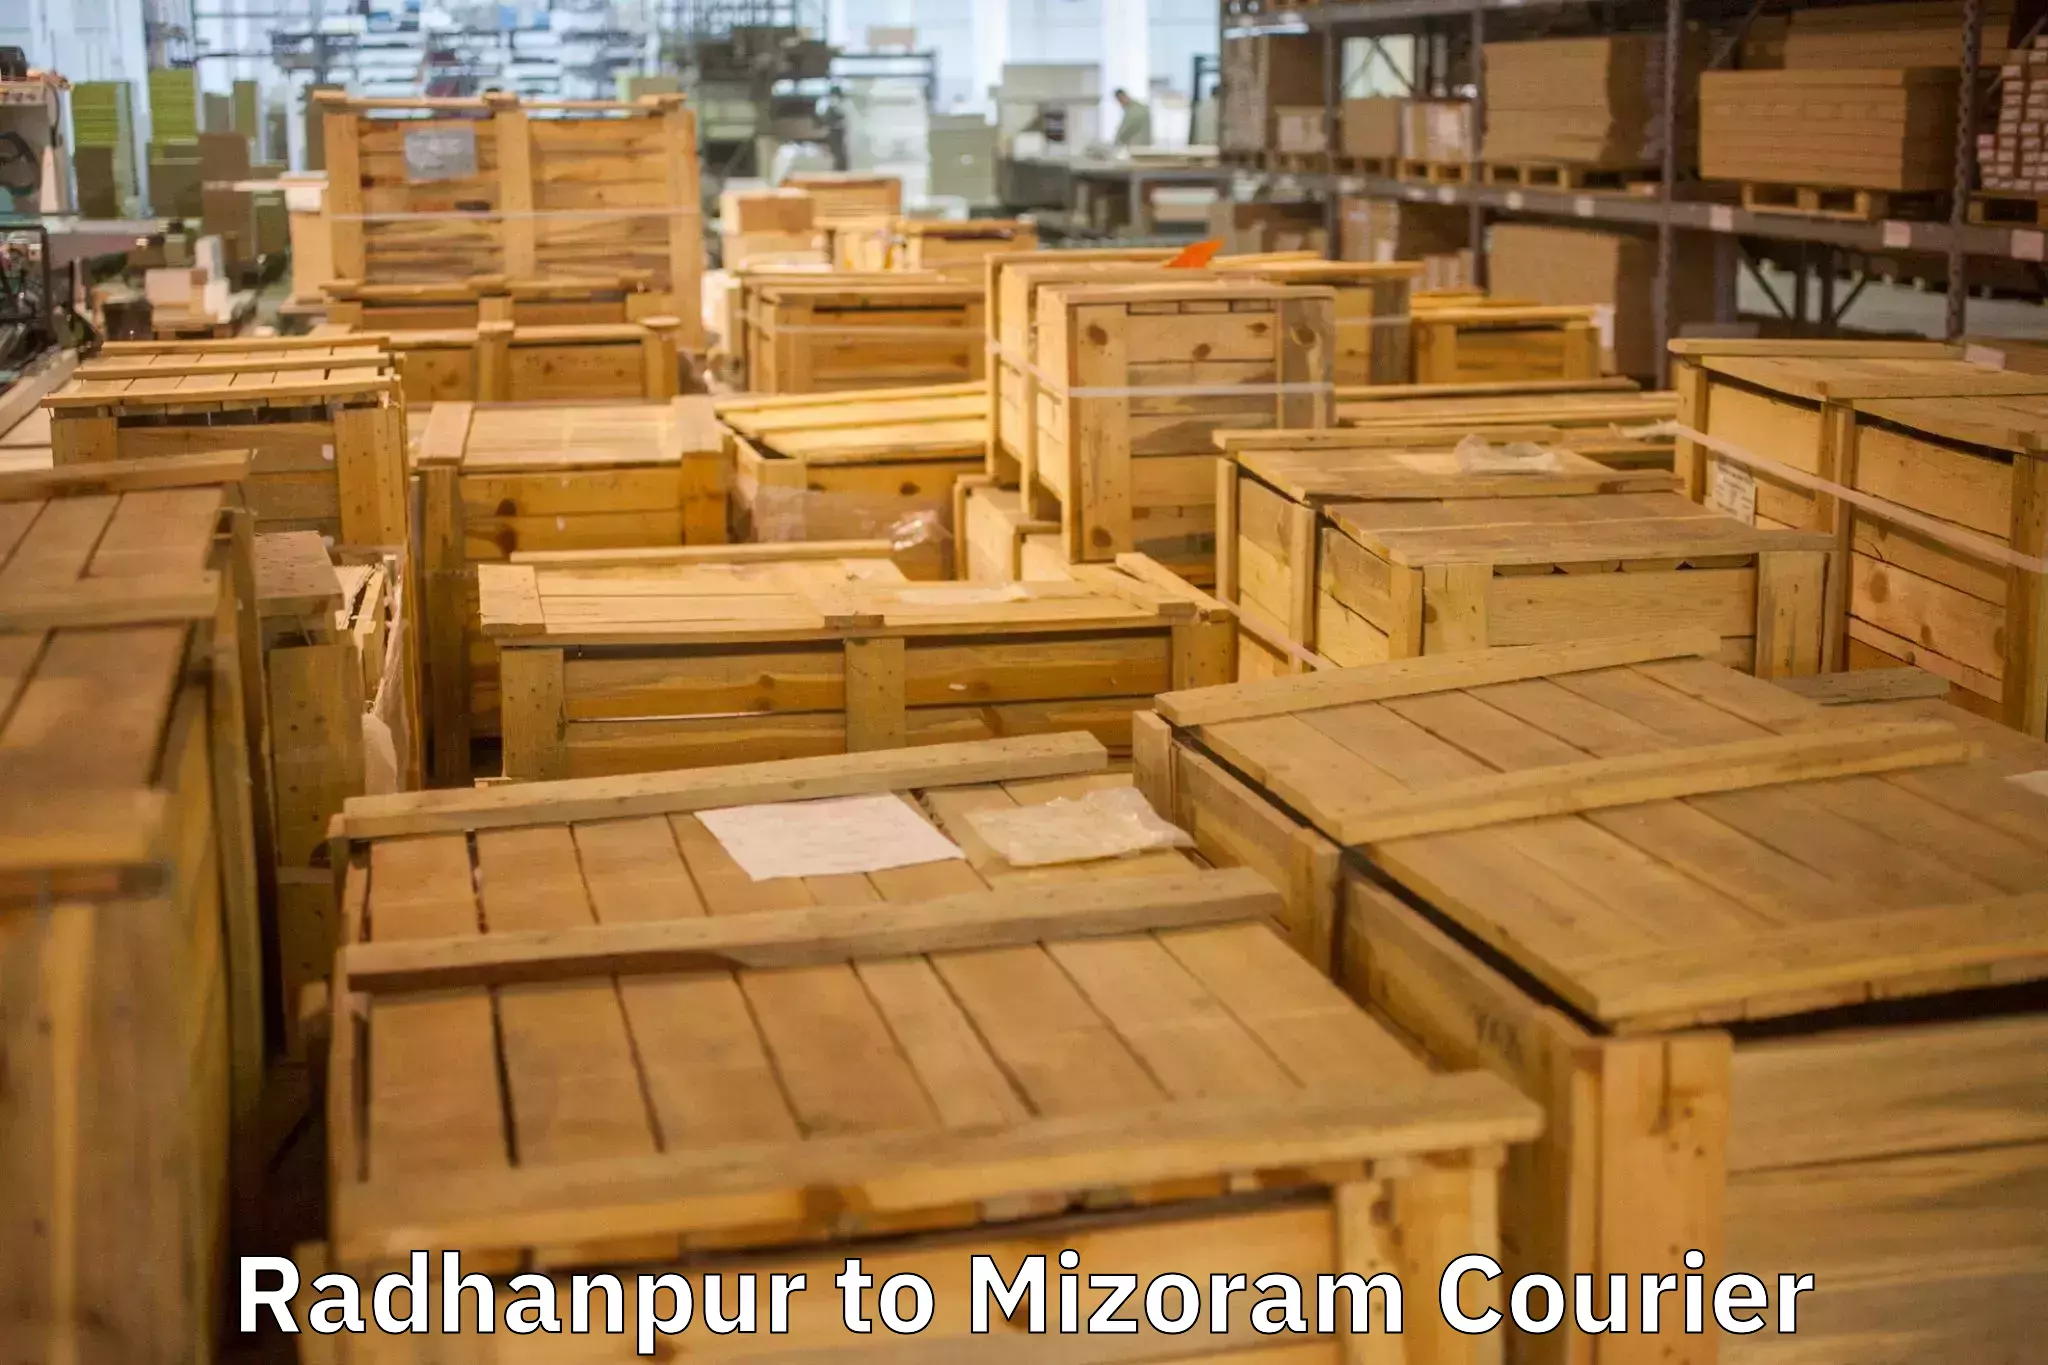 High-quality moving services in Radhanpur to Darlawn